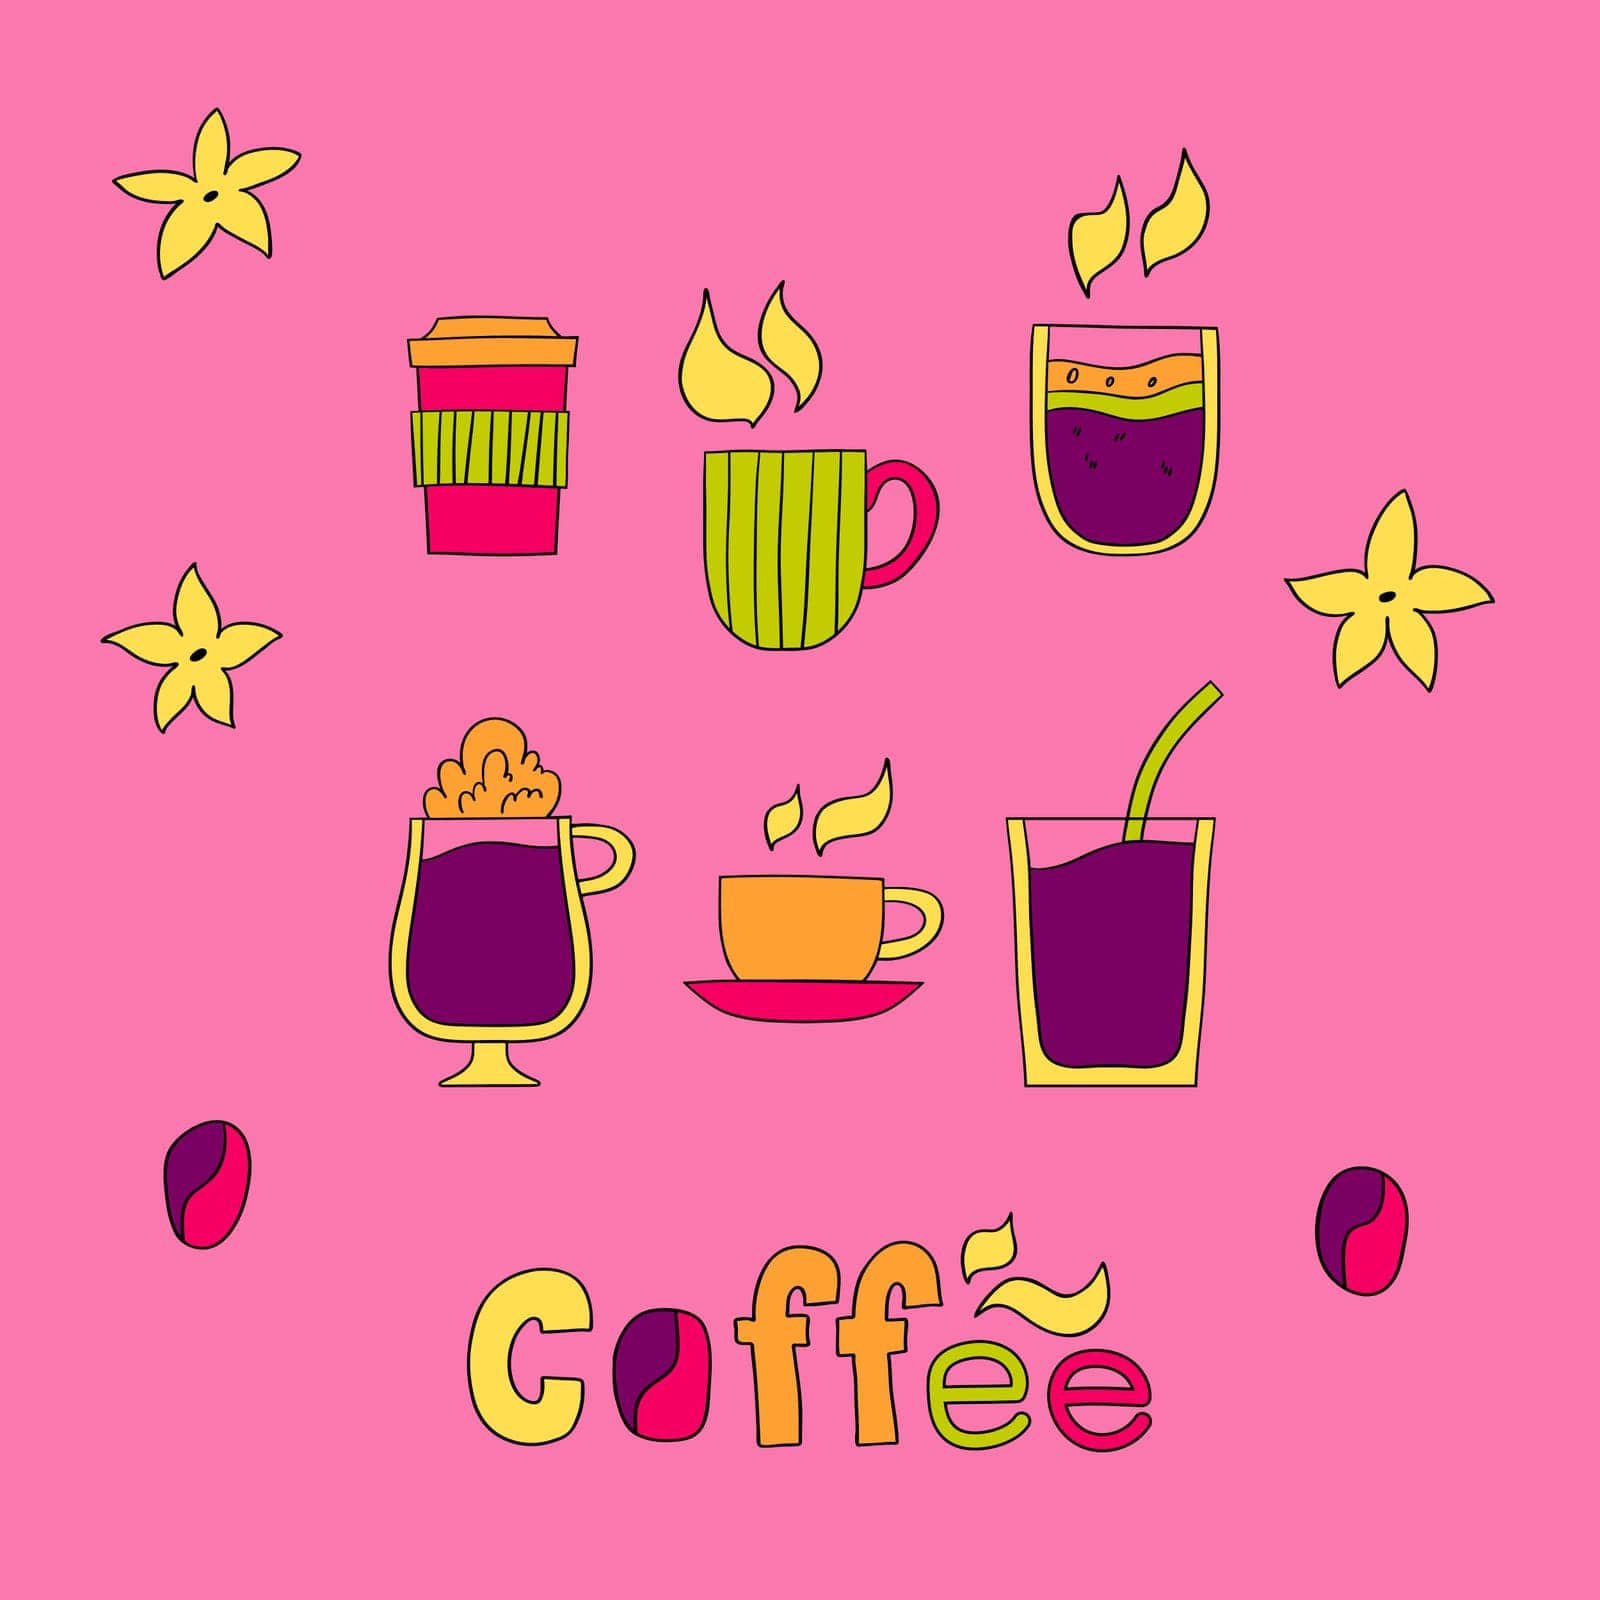 Six cups with different form. Word coffee is under the composition of cups.
Coffee beans and flowers are the elements that decorate the composition